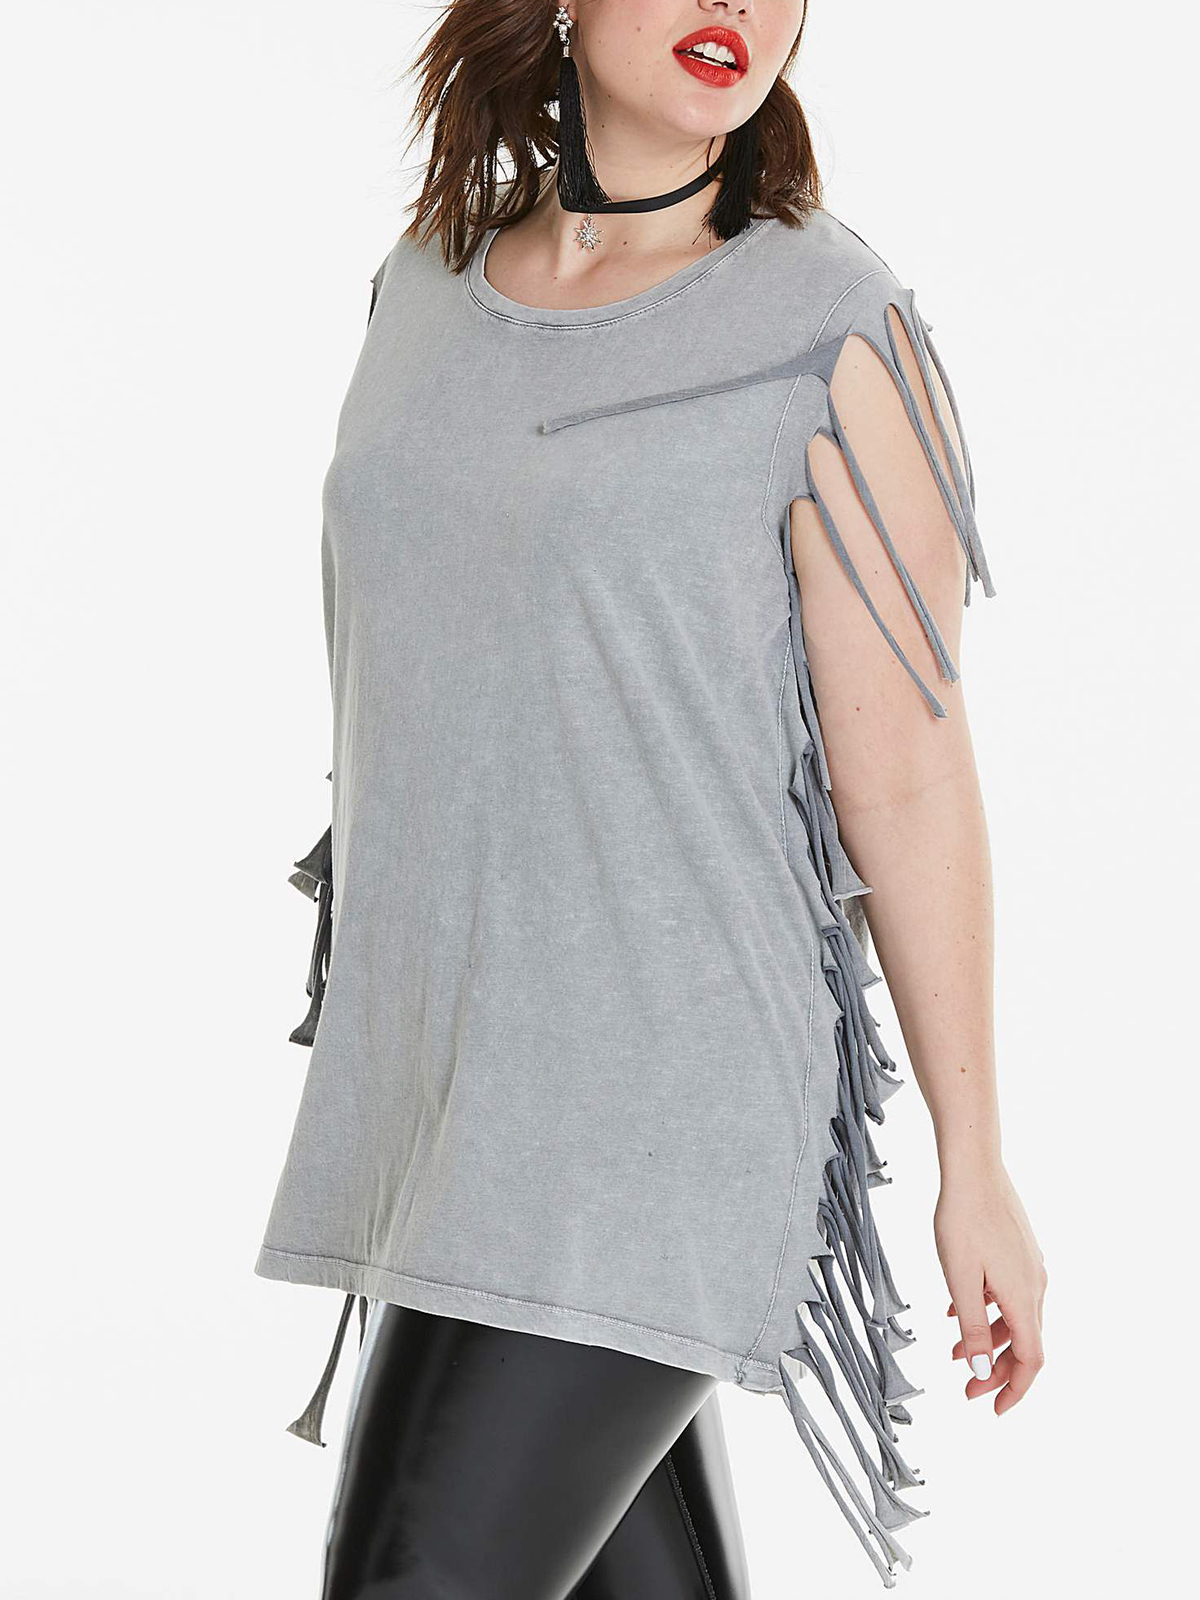 Plus Size wholesale clothing by simply be - - SimplyBe Washed GREY ...